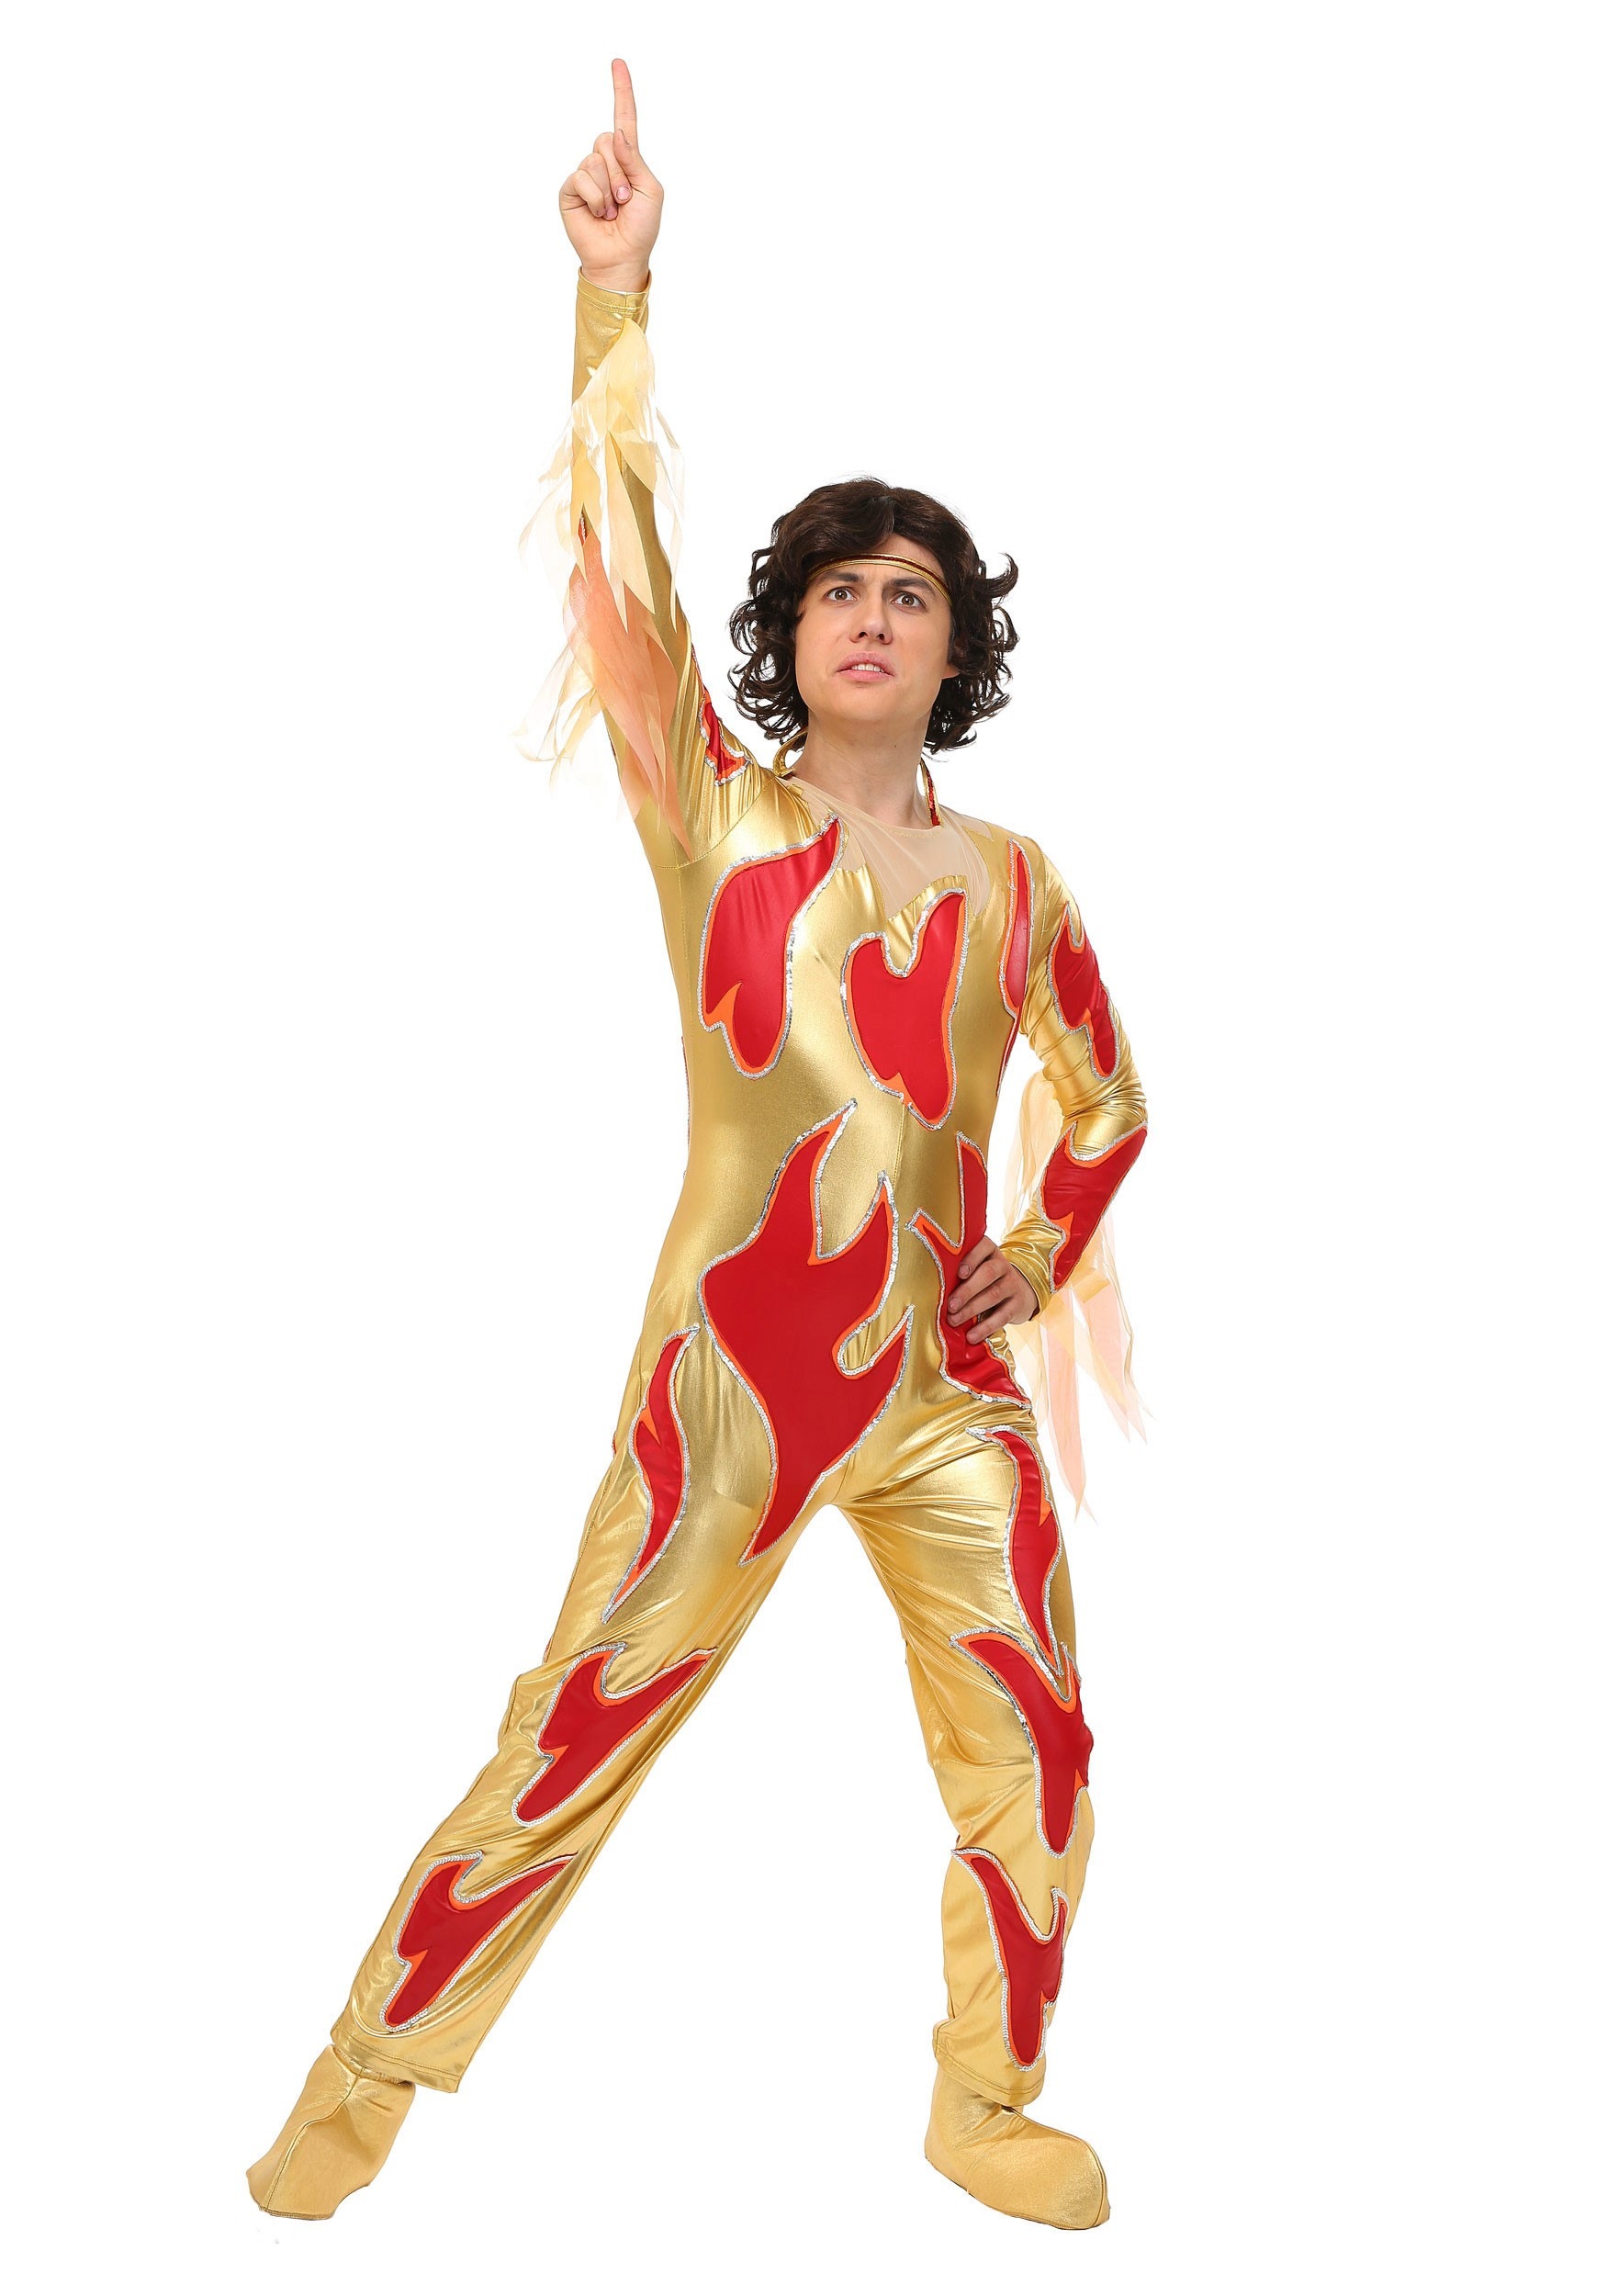 Image of FUN Costumes Blades of Glory Fire Jumpsuit for Men